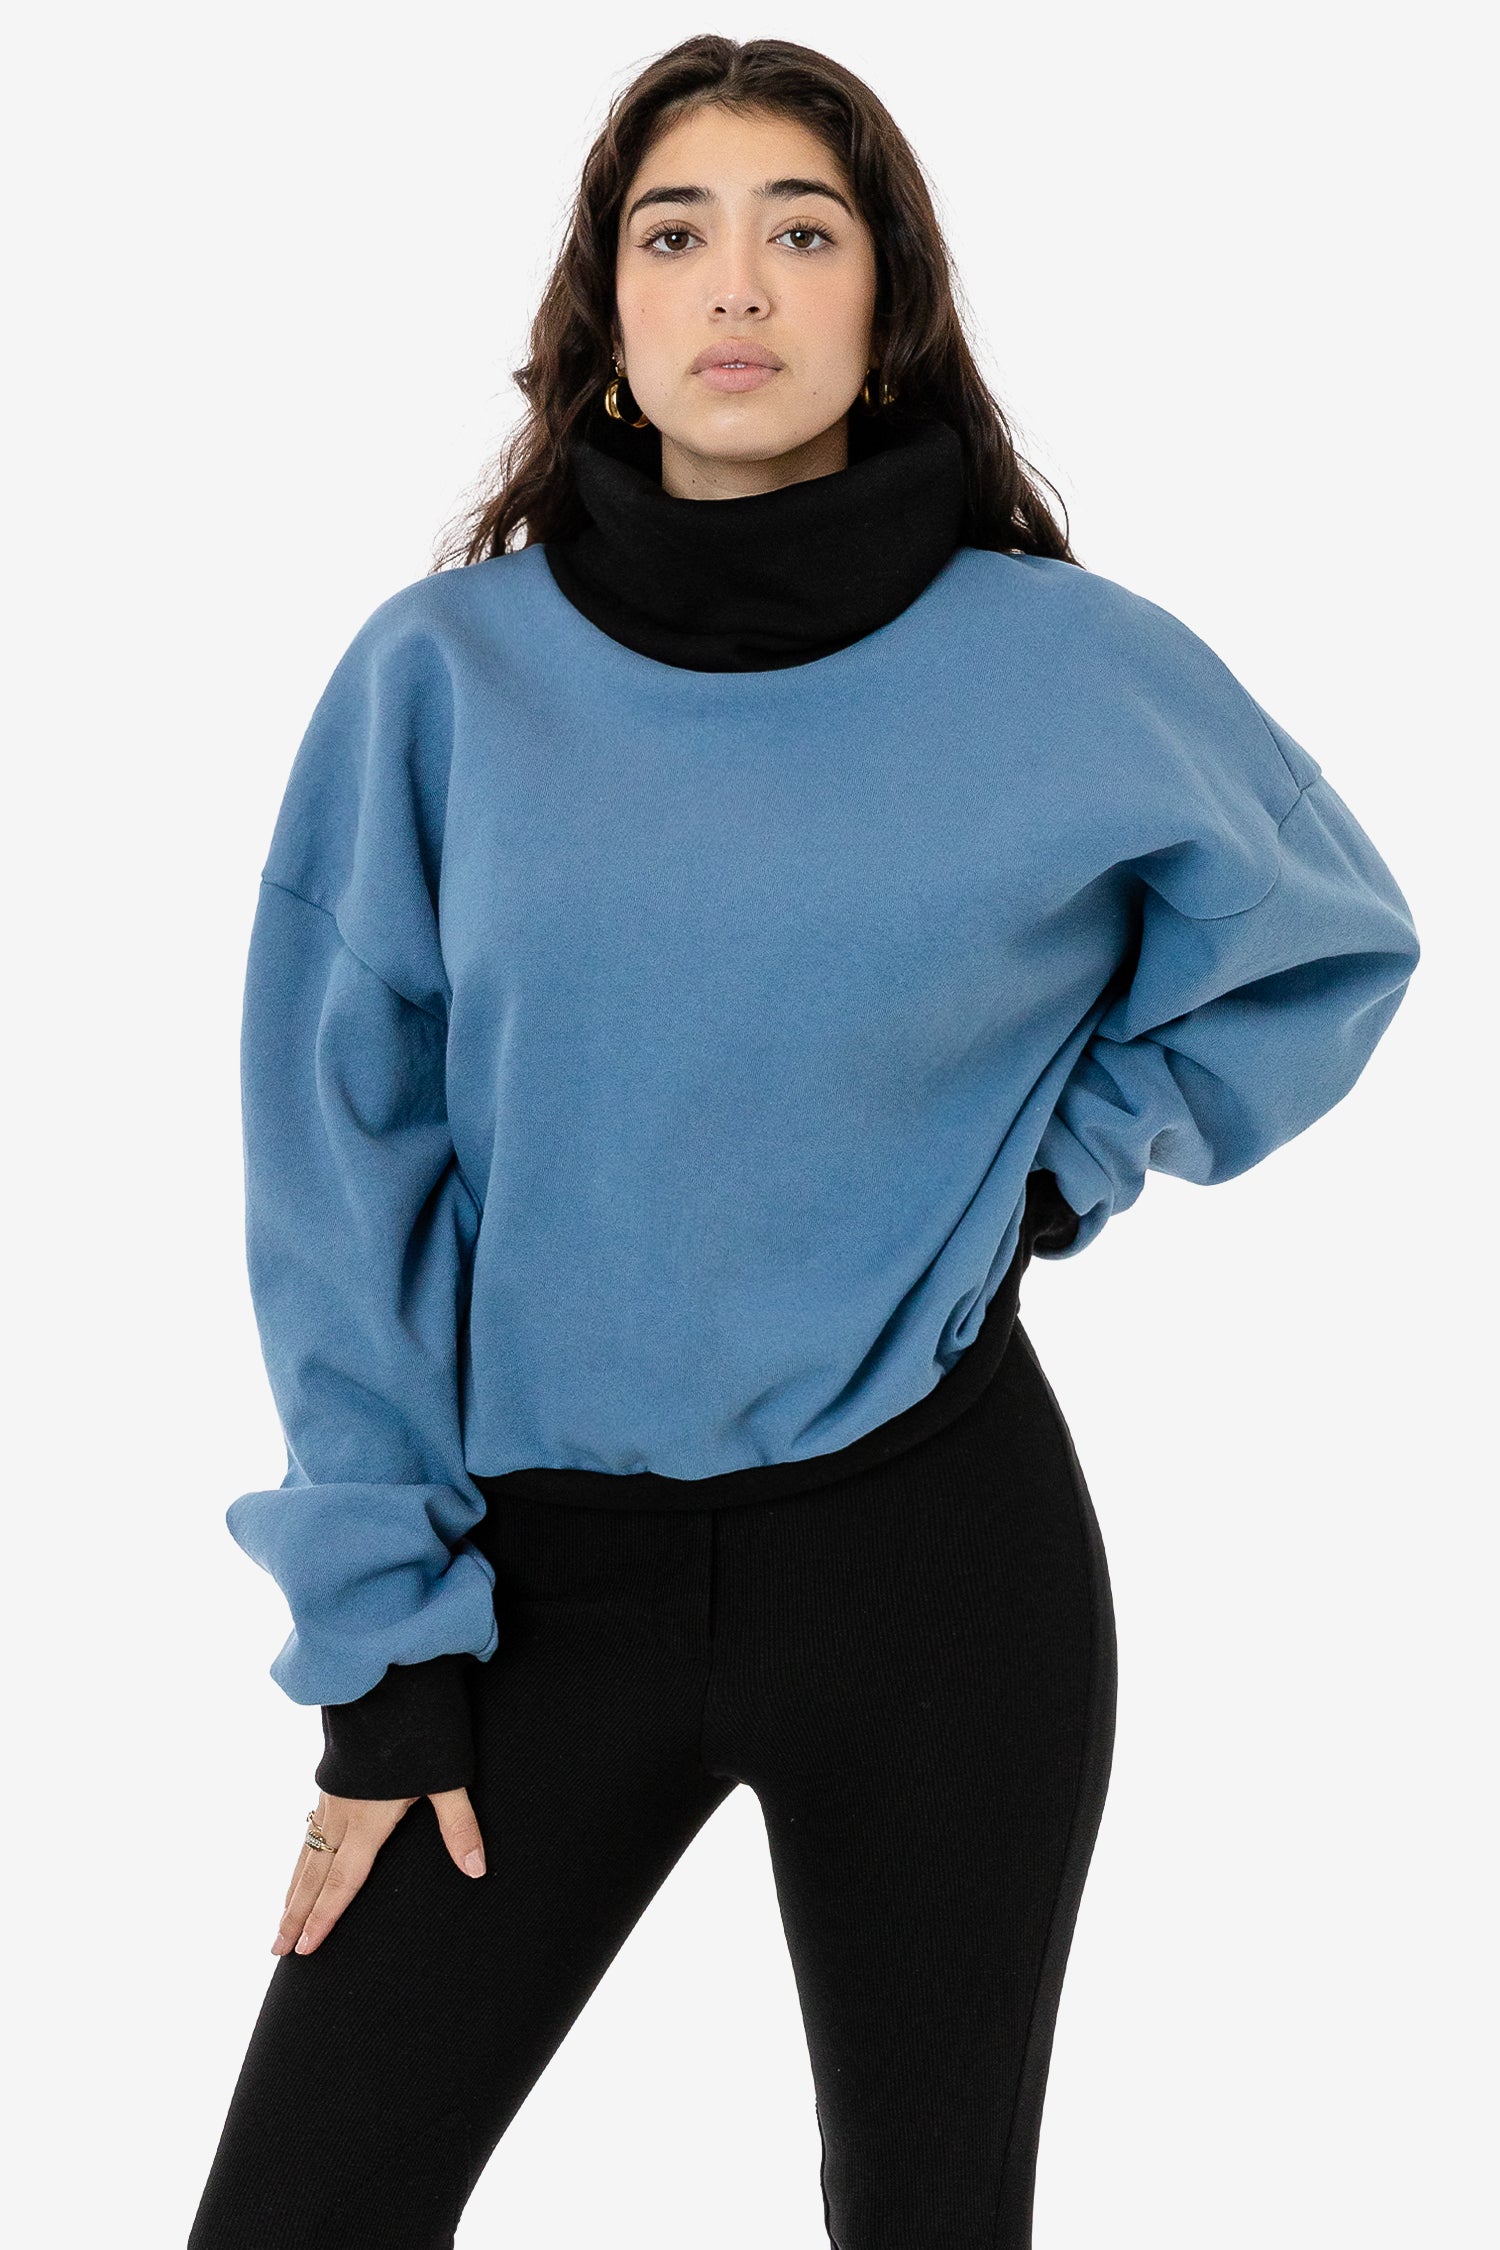 BFIRST1 High Neck Turtle Neck Women's Top - Ribbed Material, Full Sleeve -  Stylish and Cozy